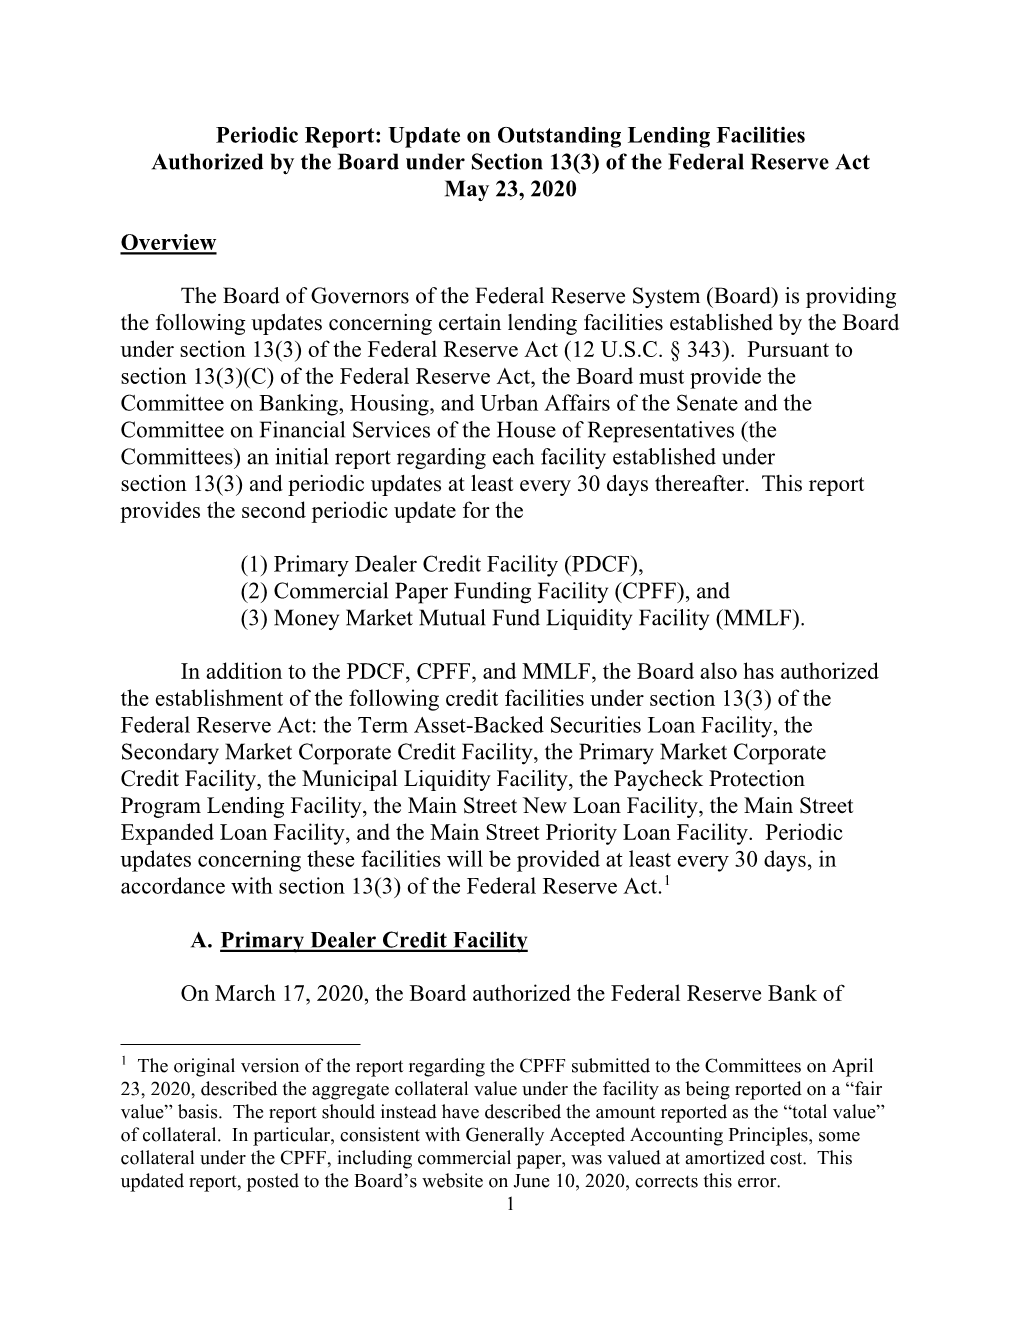 Periodic Report: Update on Outstanding Lending Facilities Authorized by the Board Under Section 13(3) of the Federal Reserve Act May 23, 2020